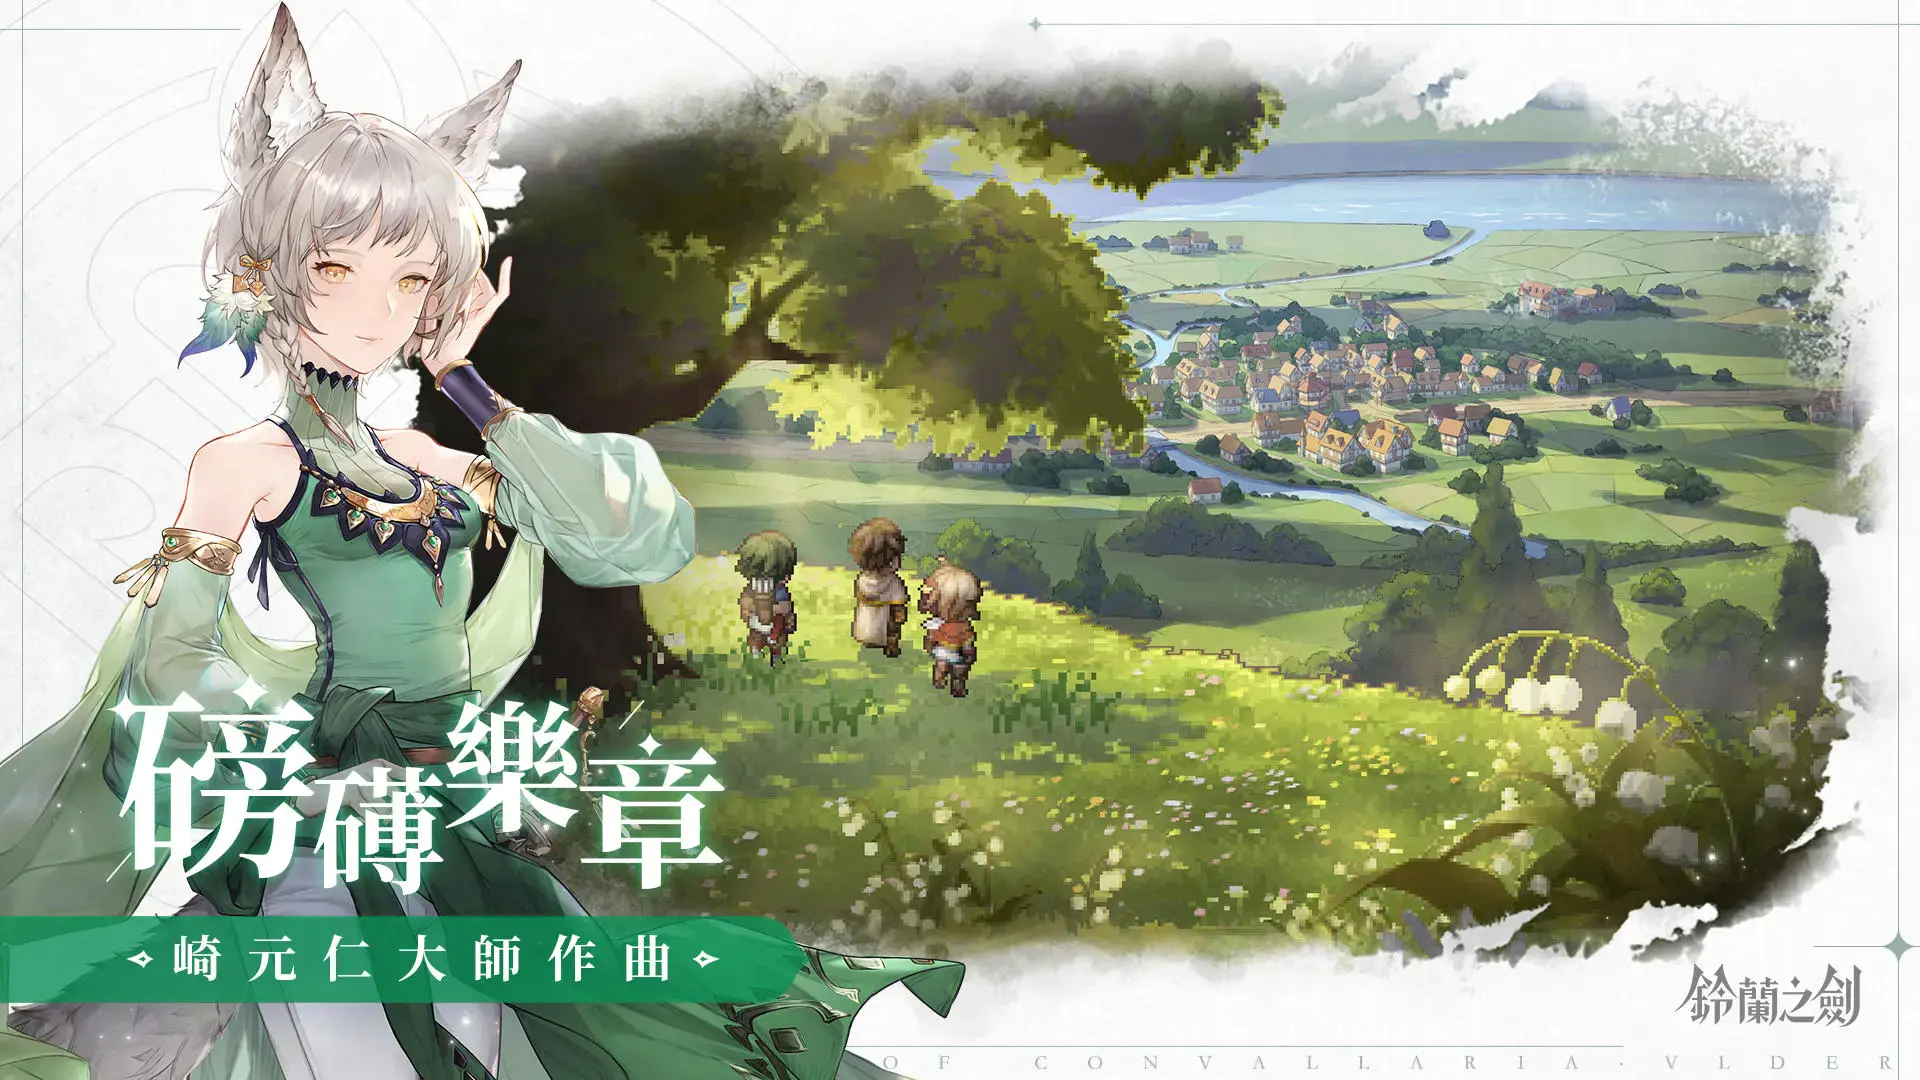 Screenshot 1 of Sword of Lily of the Valley: For This Peaceful World (PC) 